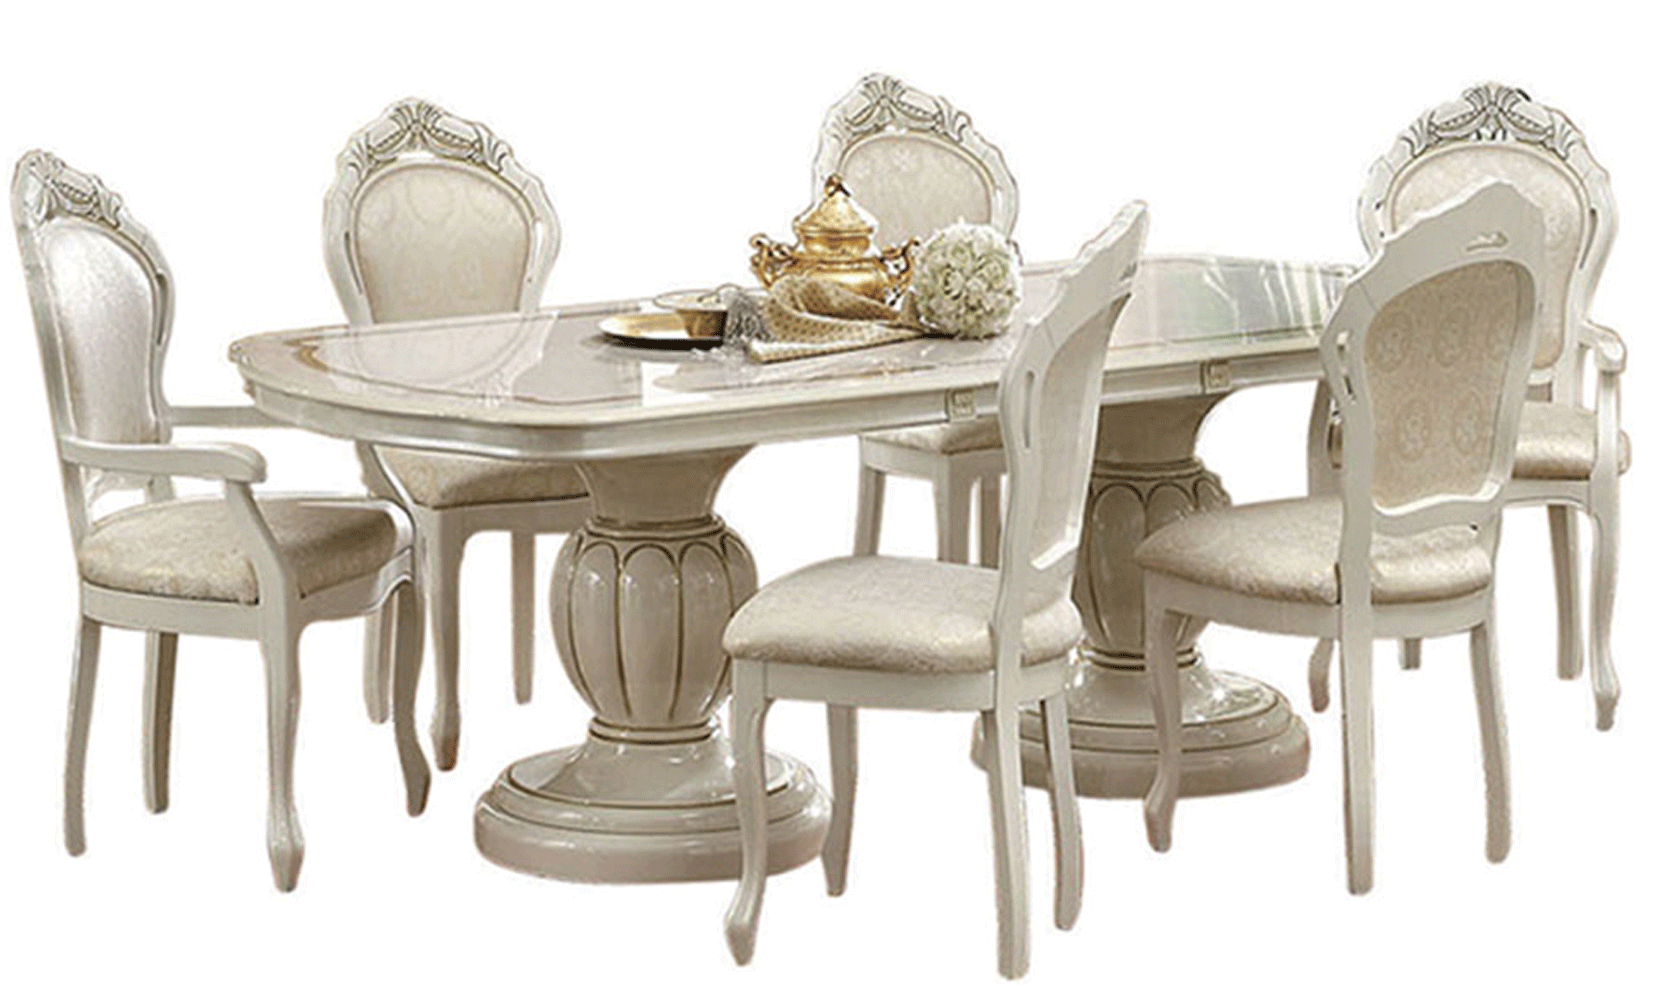 Dining Room Furniture China Cabinets and Buffets Leonardo Dining Table